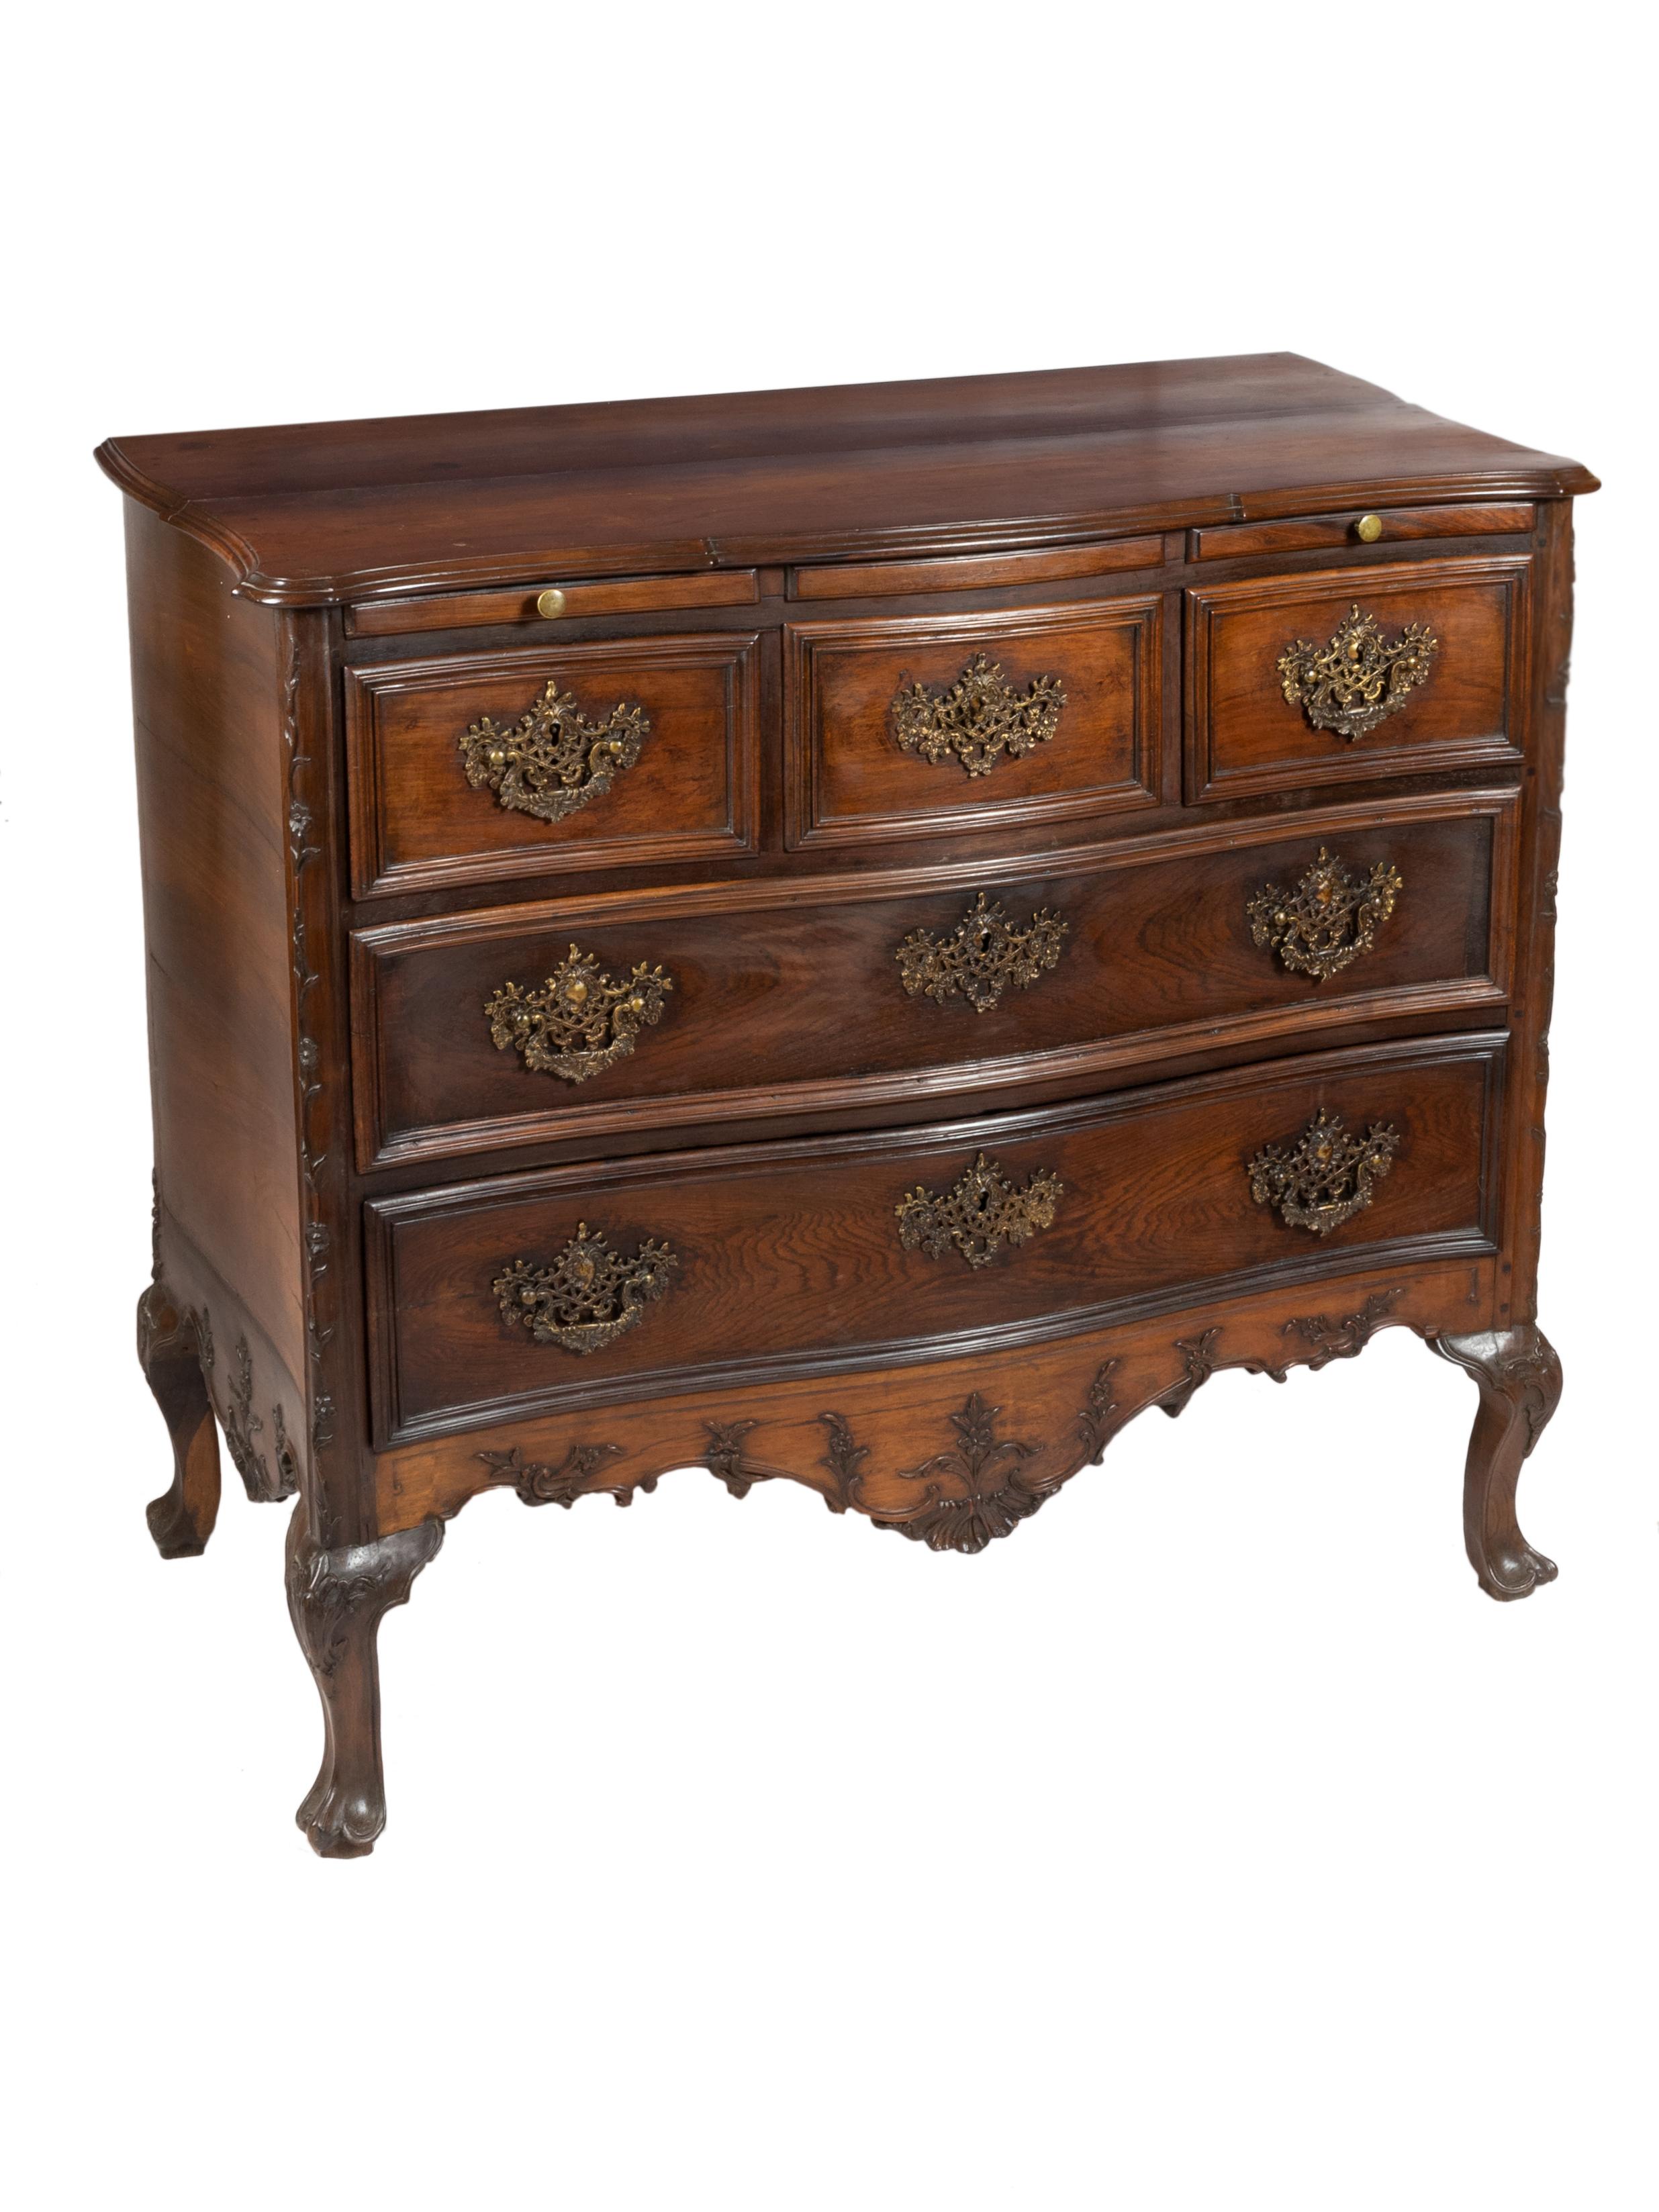 A  richly wooden commode chest of drawers with a scalloped top and corners, two small drawers and three big drawers, cut-out and finely carved skirts with floral motifs and volutes with winding endings. Partially rounded pilasters with well-curved